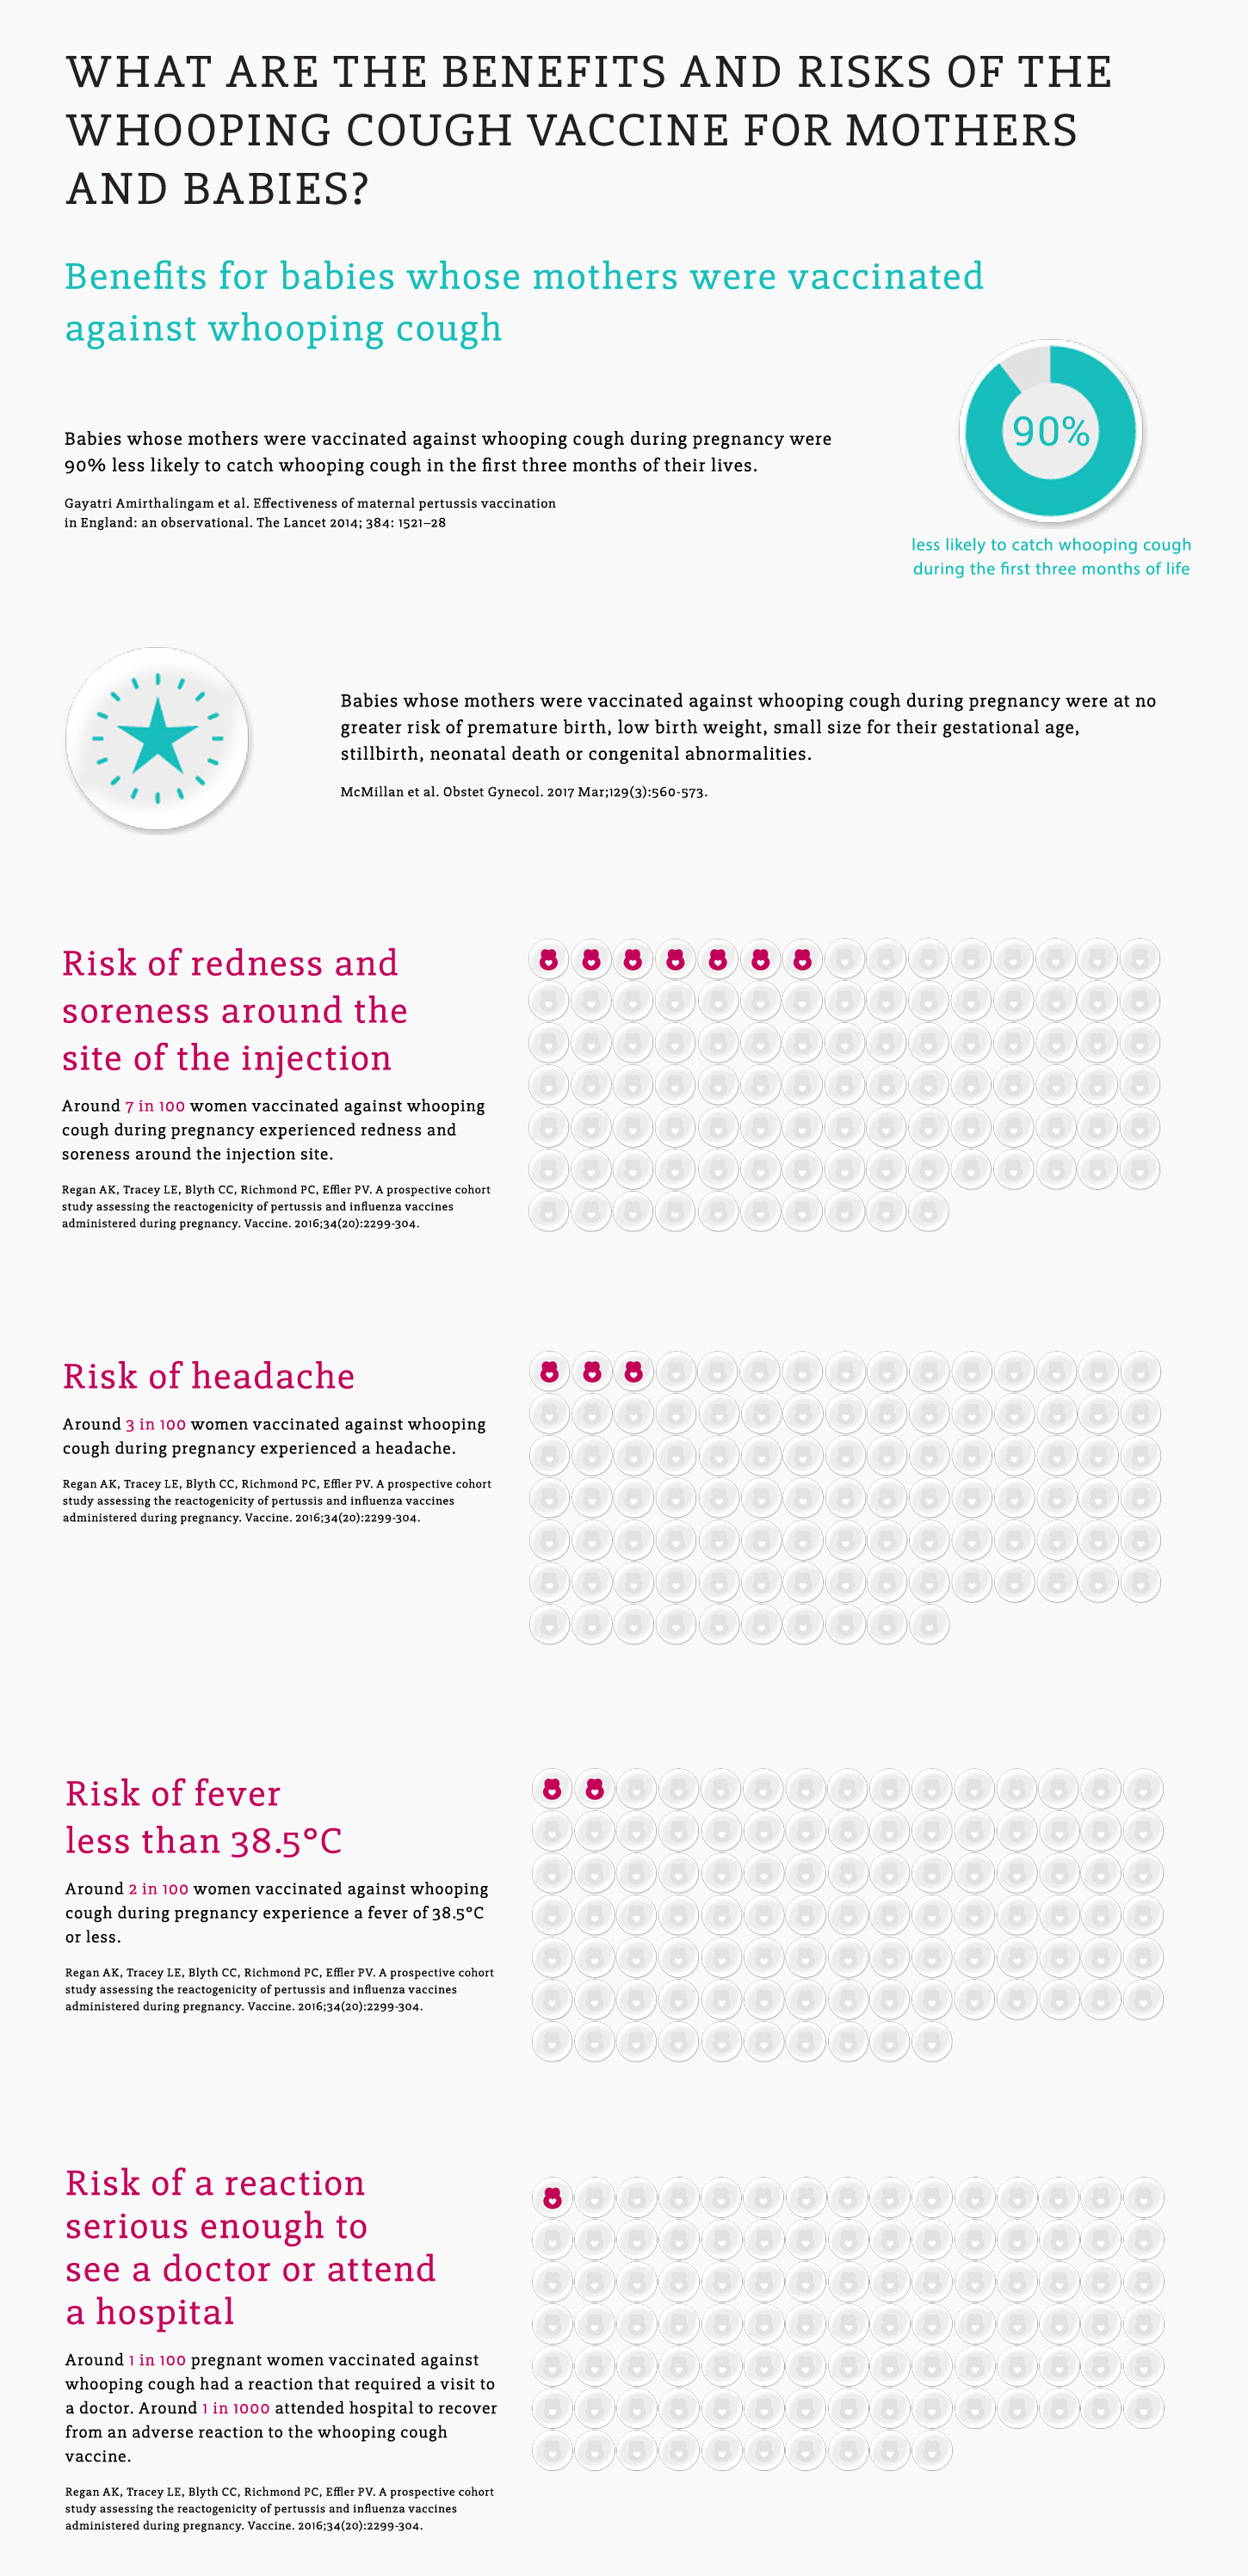 infographic: Risks and benefits of the whooping cough vaccine